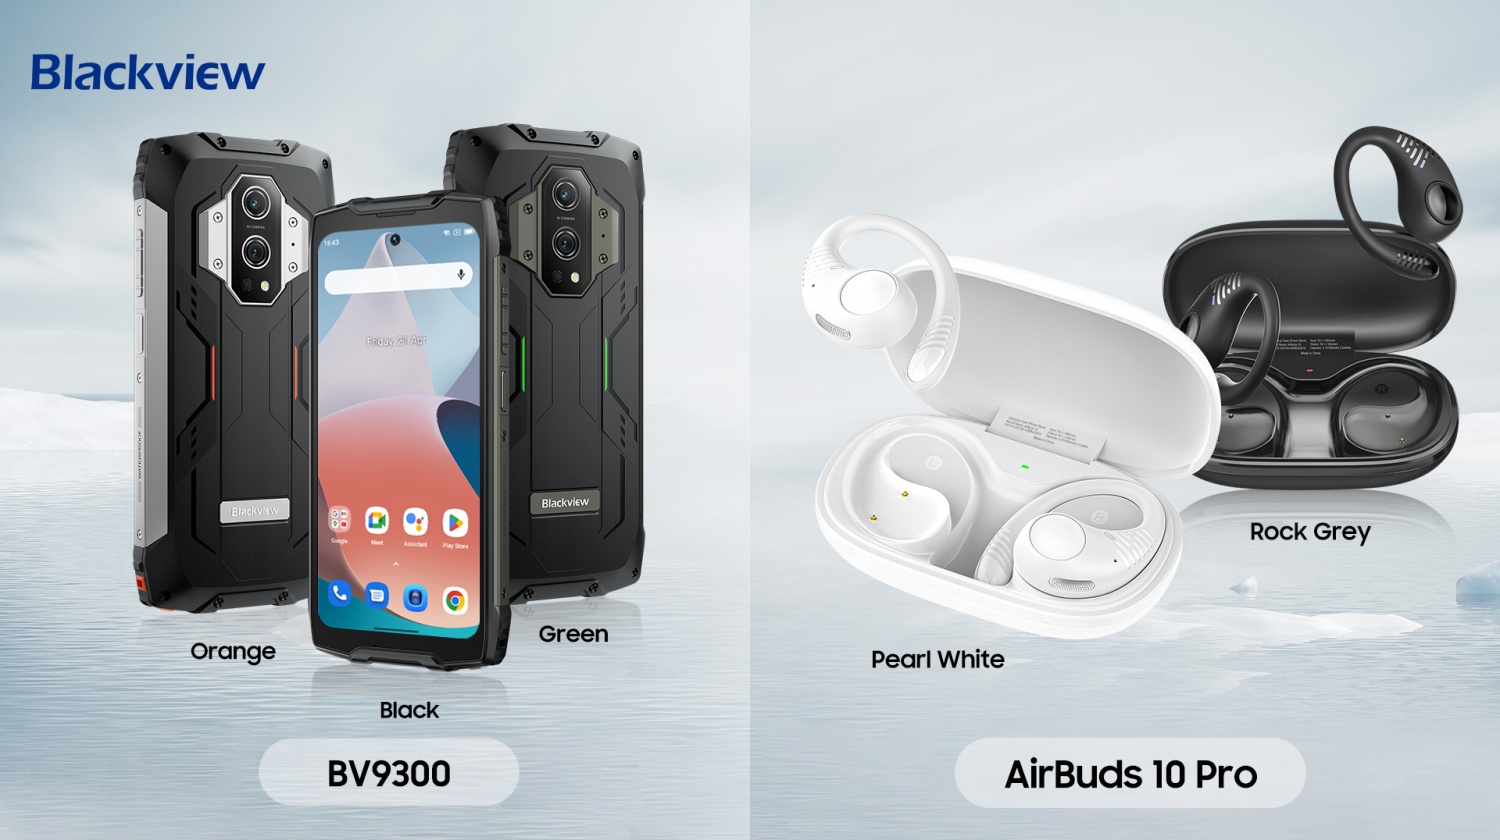 [Blackview] New Rugged Blackview BV9300 Released with AirBuds